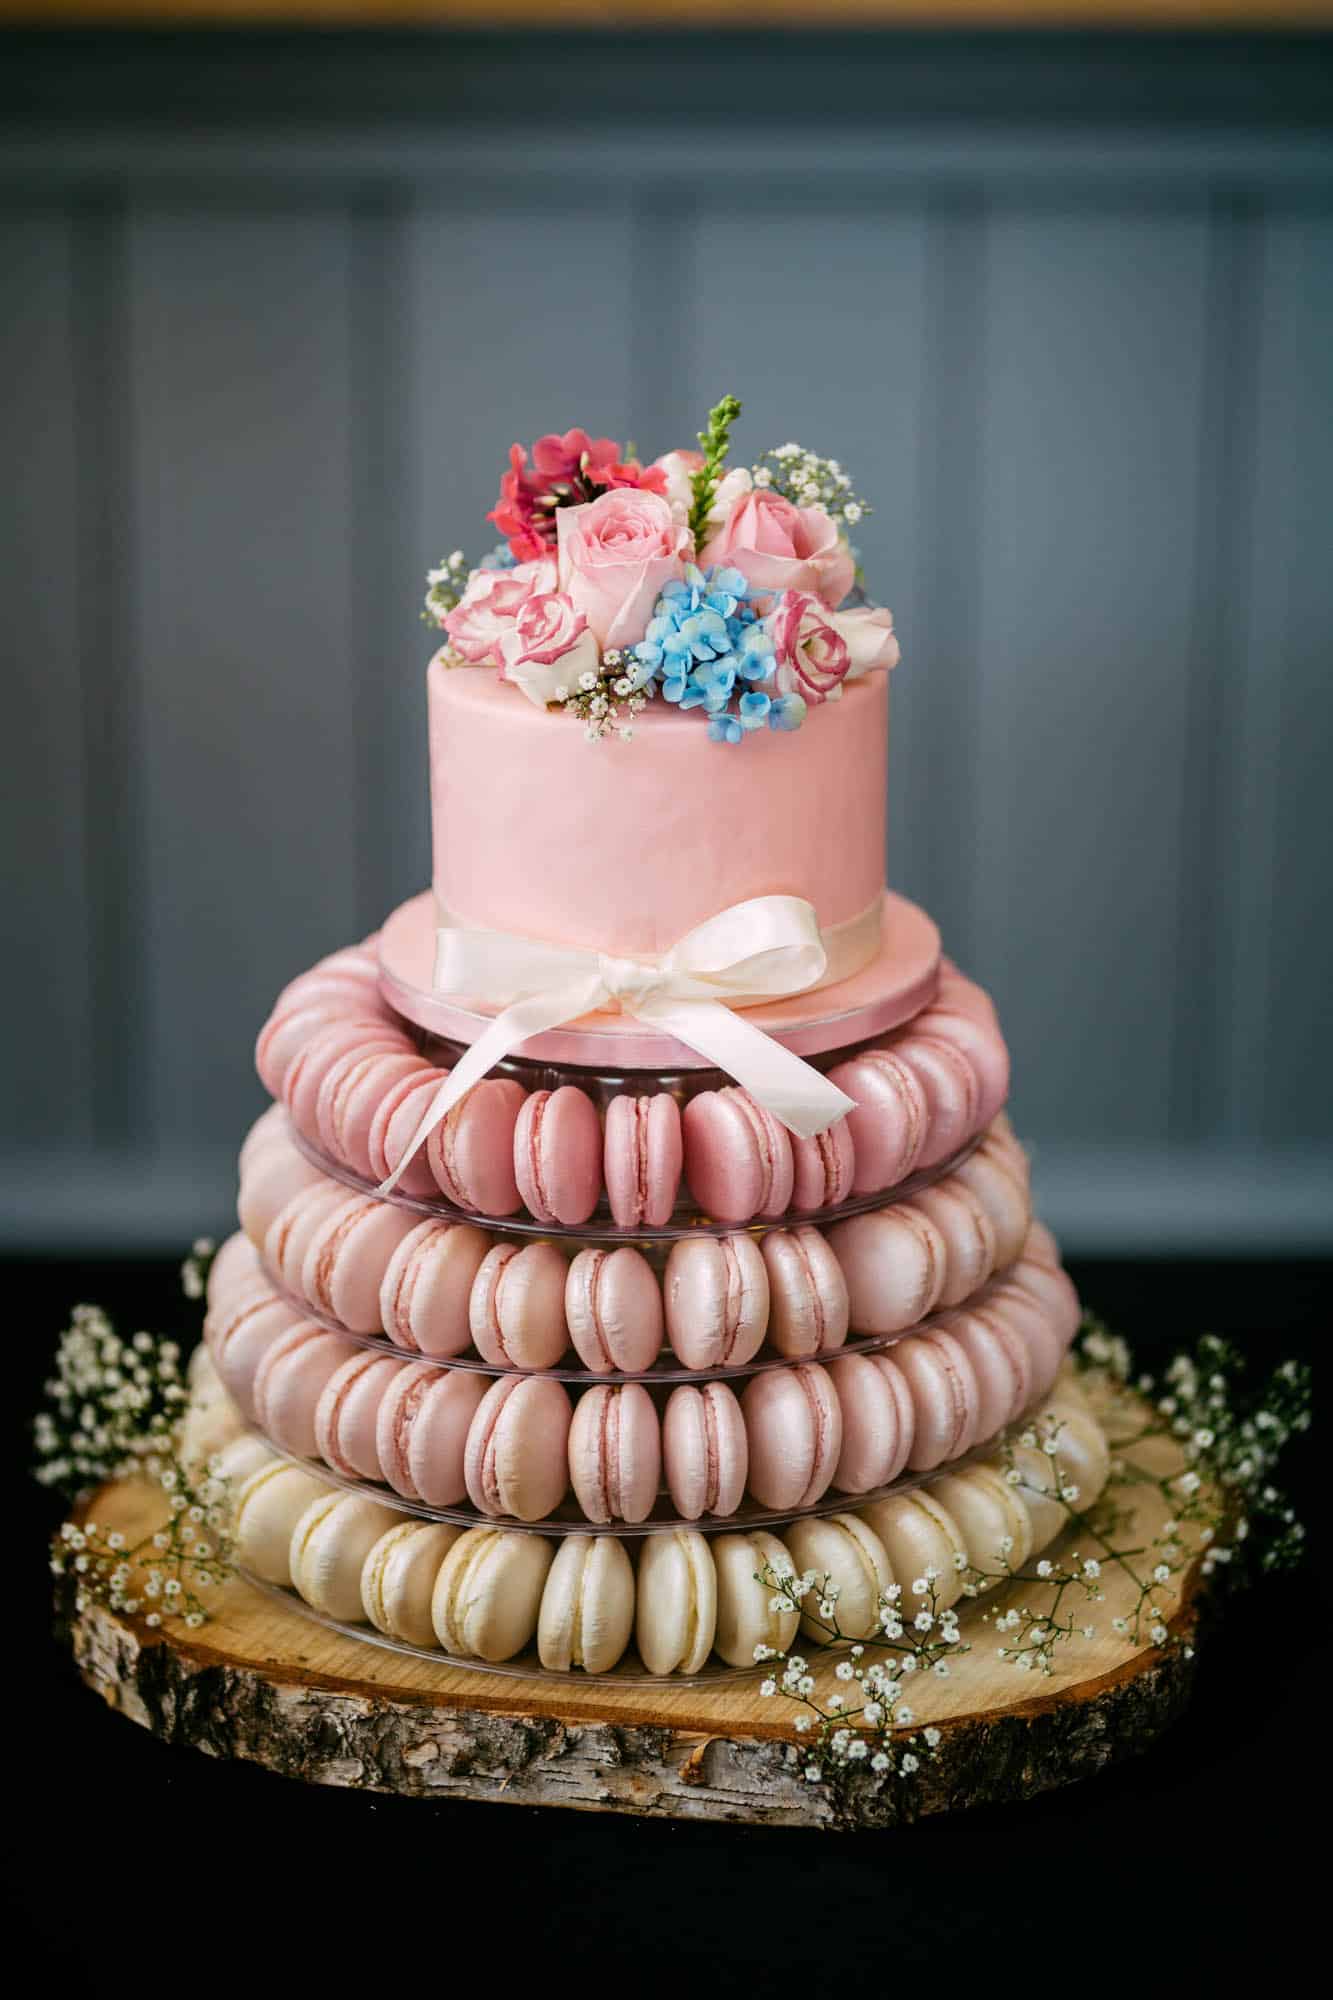 A wedding cake with macaroons on top.